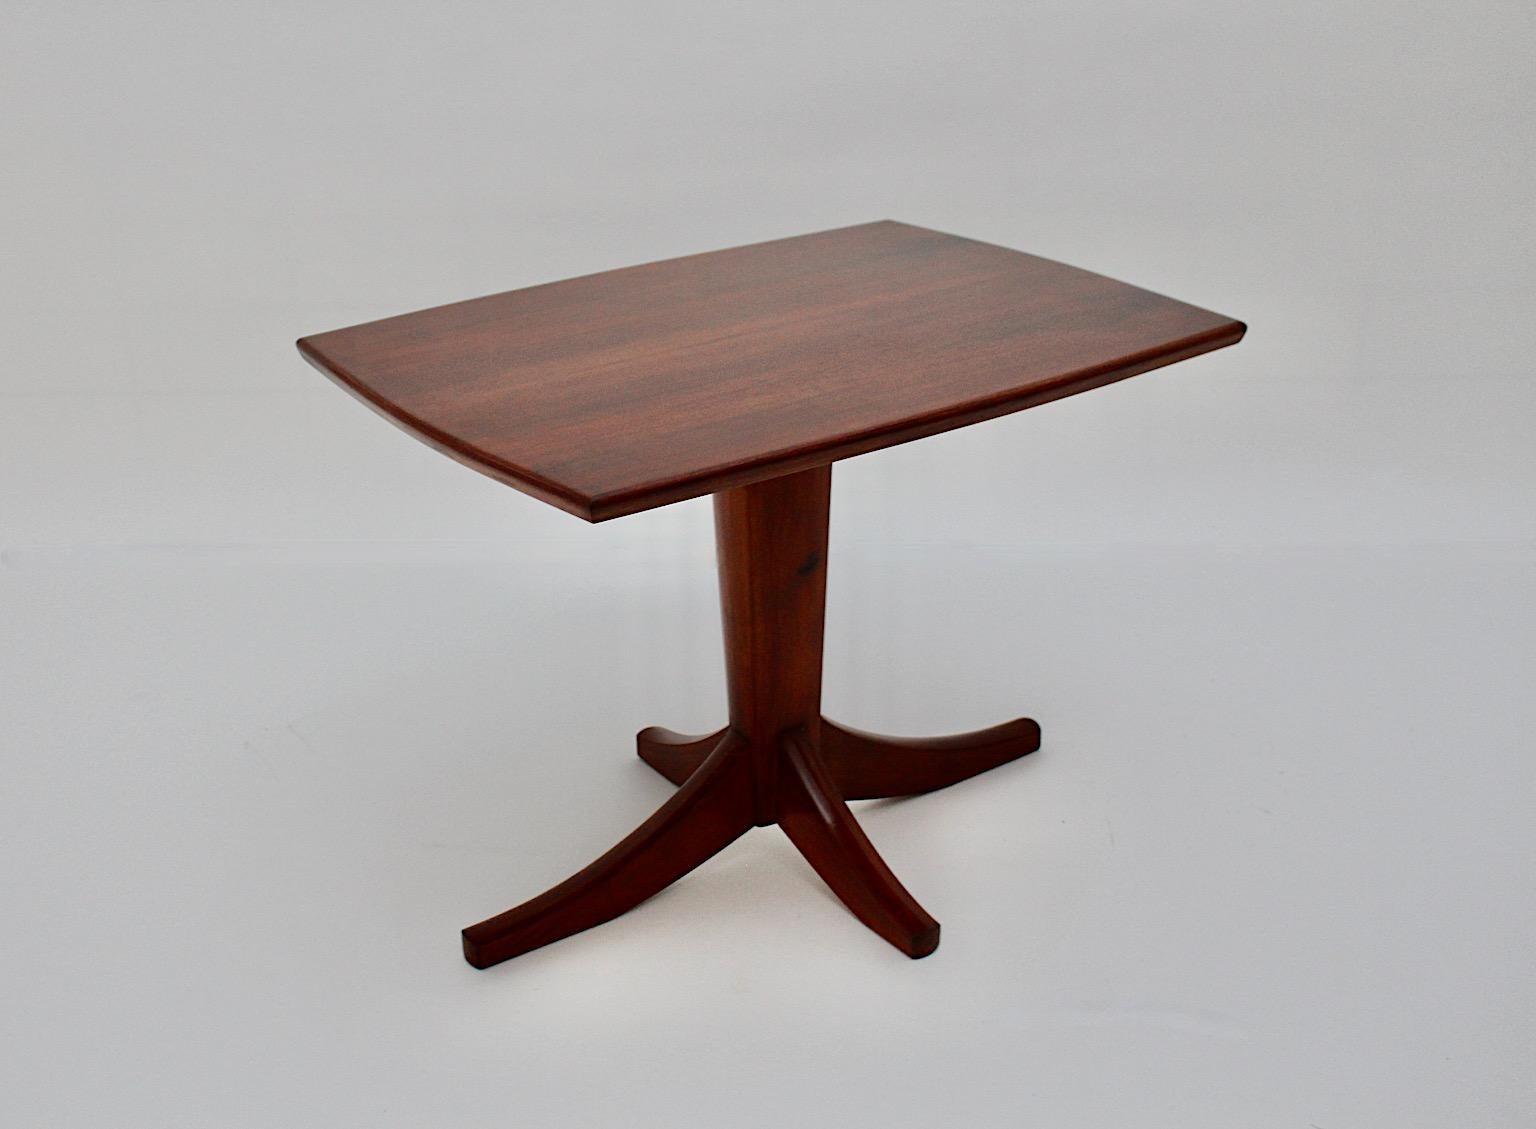 Art Deco vintage rectangular walnut organic side table by Josef Frank circa 1925 Austria.
A beautiful side table of coffee table by Josef Frank in rectangular form.
This stunning and rare side table shows details as a conical stem with 4 feet in